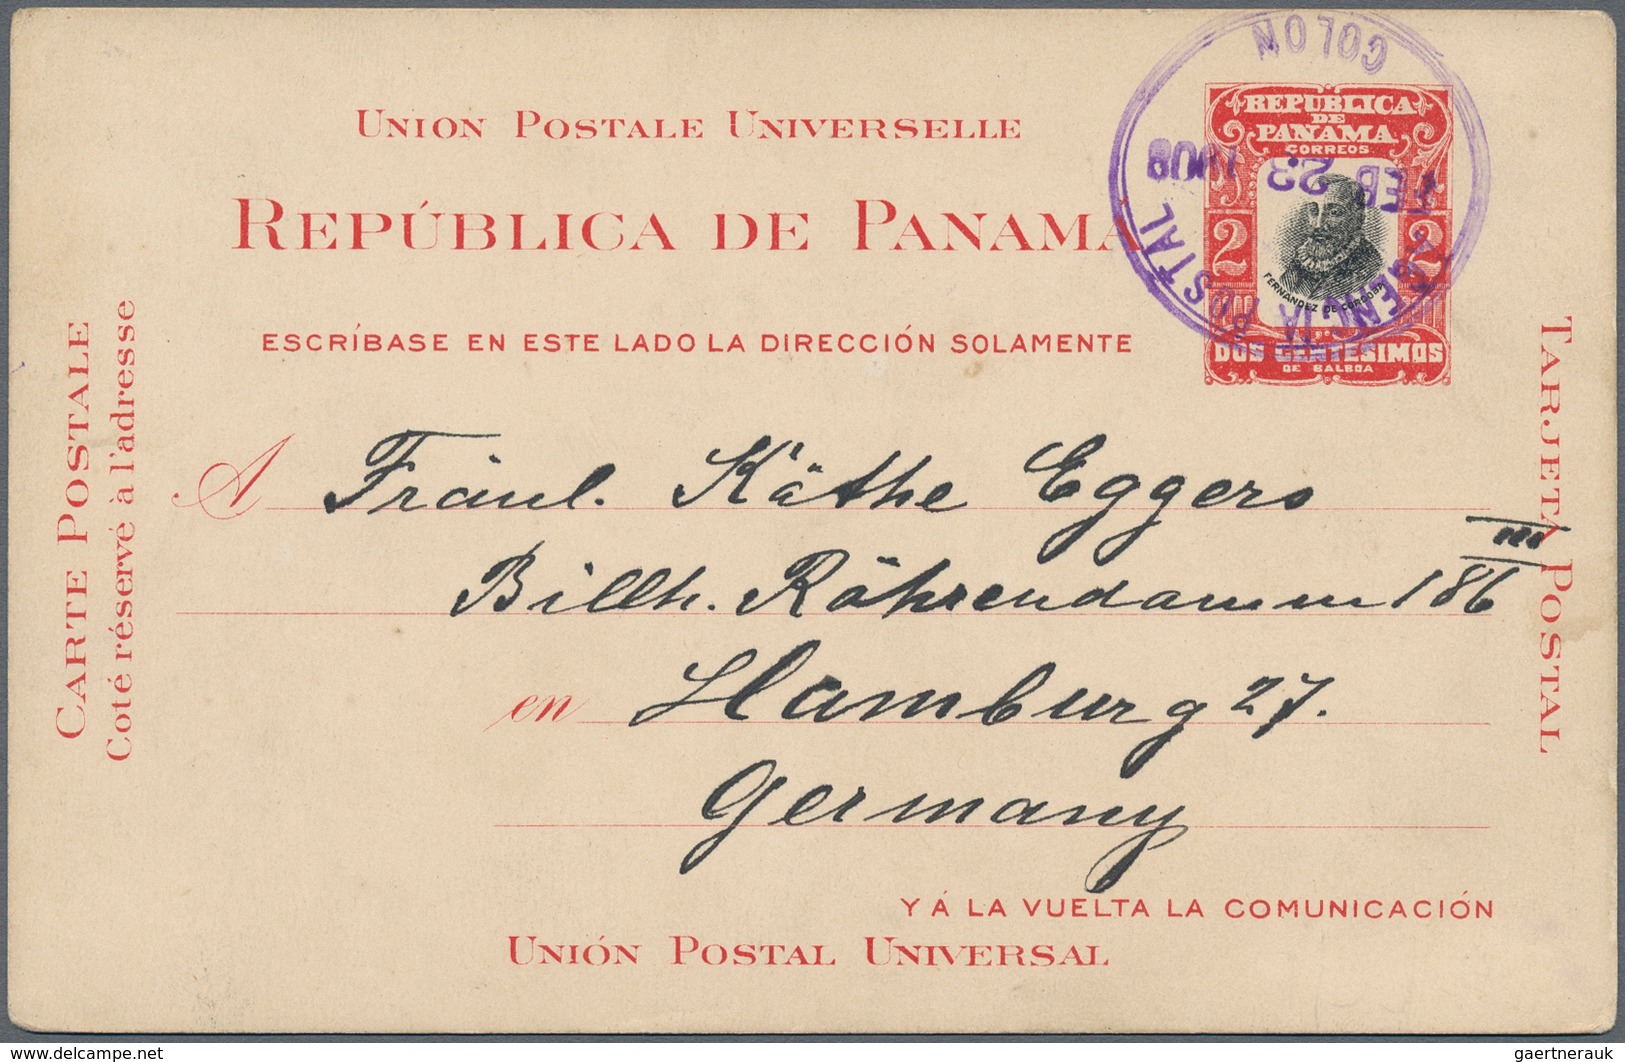 Karibik: 1908/70 (ca.), Covers/used Stationery Of Cuba (23), Dominican Republic (11), Haiti (5) And - Autres - Amérique